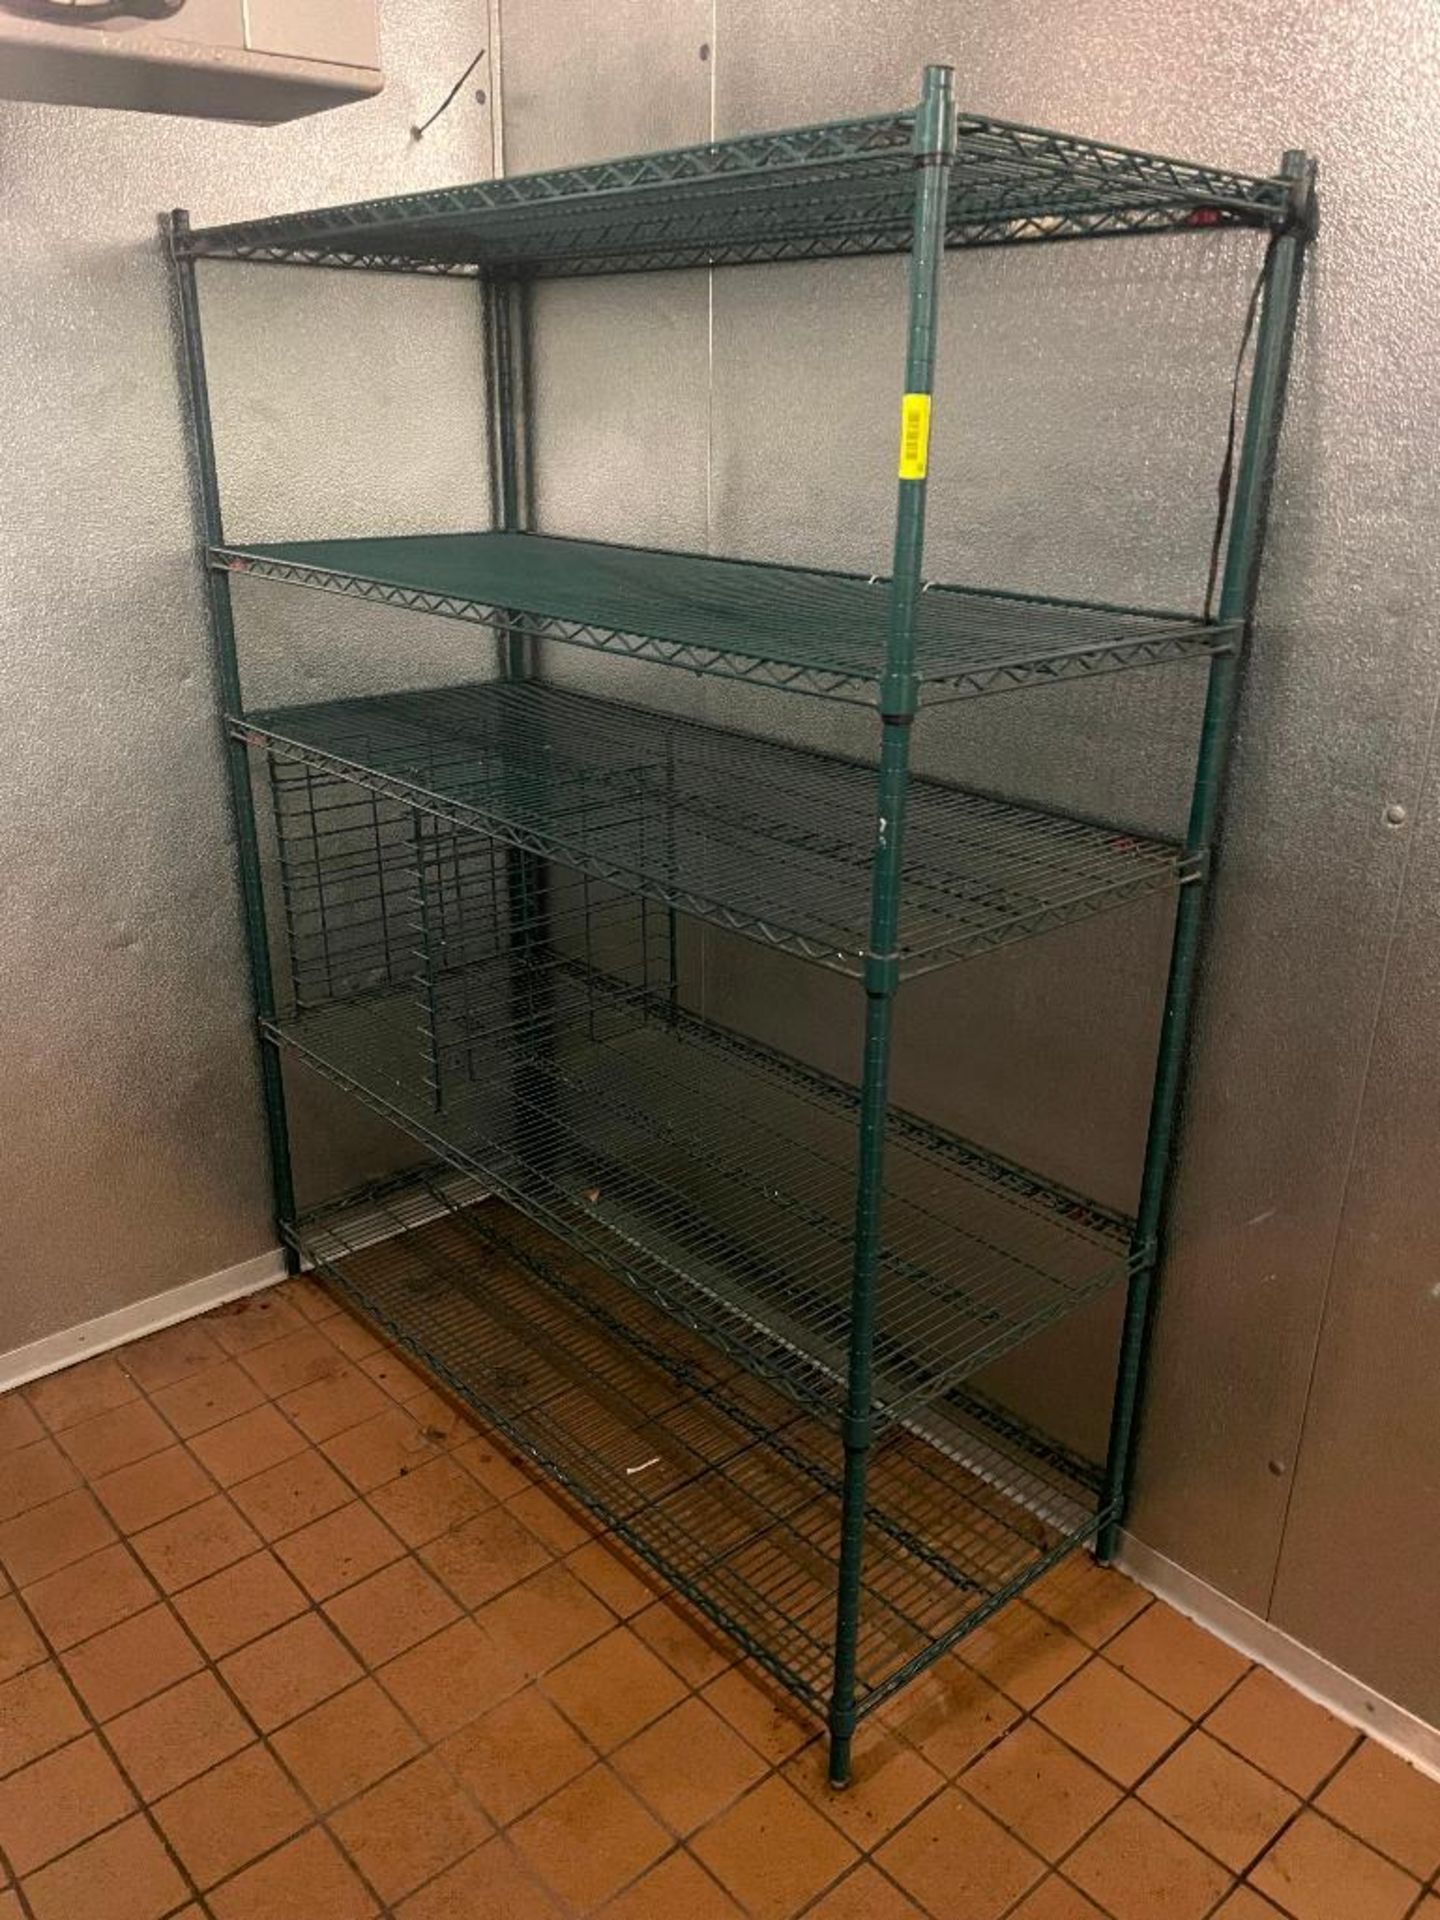 DESCRIPTION: 60" X 24" FIVE TIER COATED WIRE RACK. LOCATION: ALLEN TX SHUTTLE FEE TO ST. LOUIS THIS